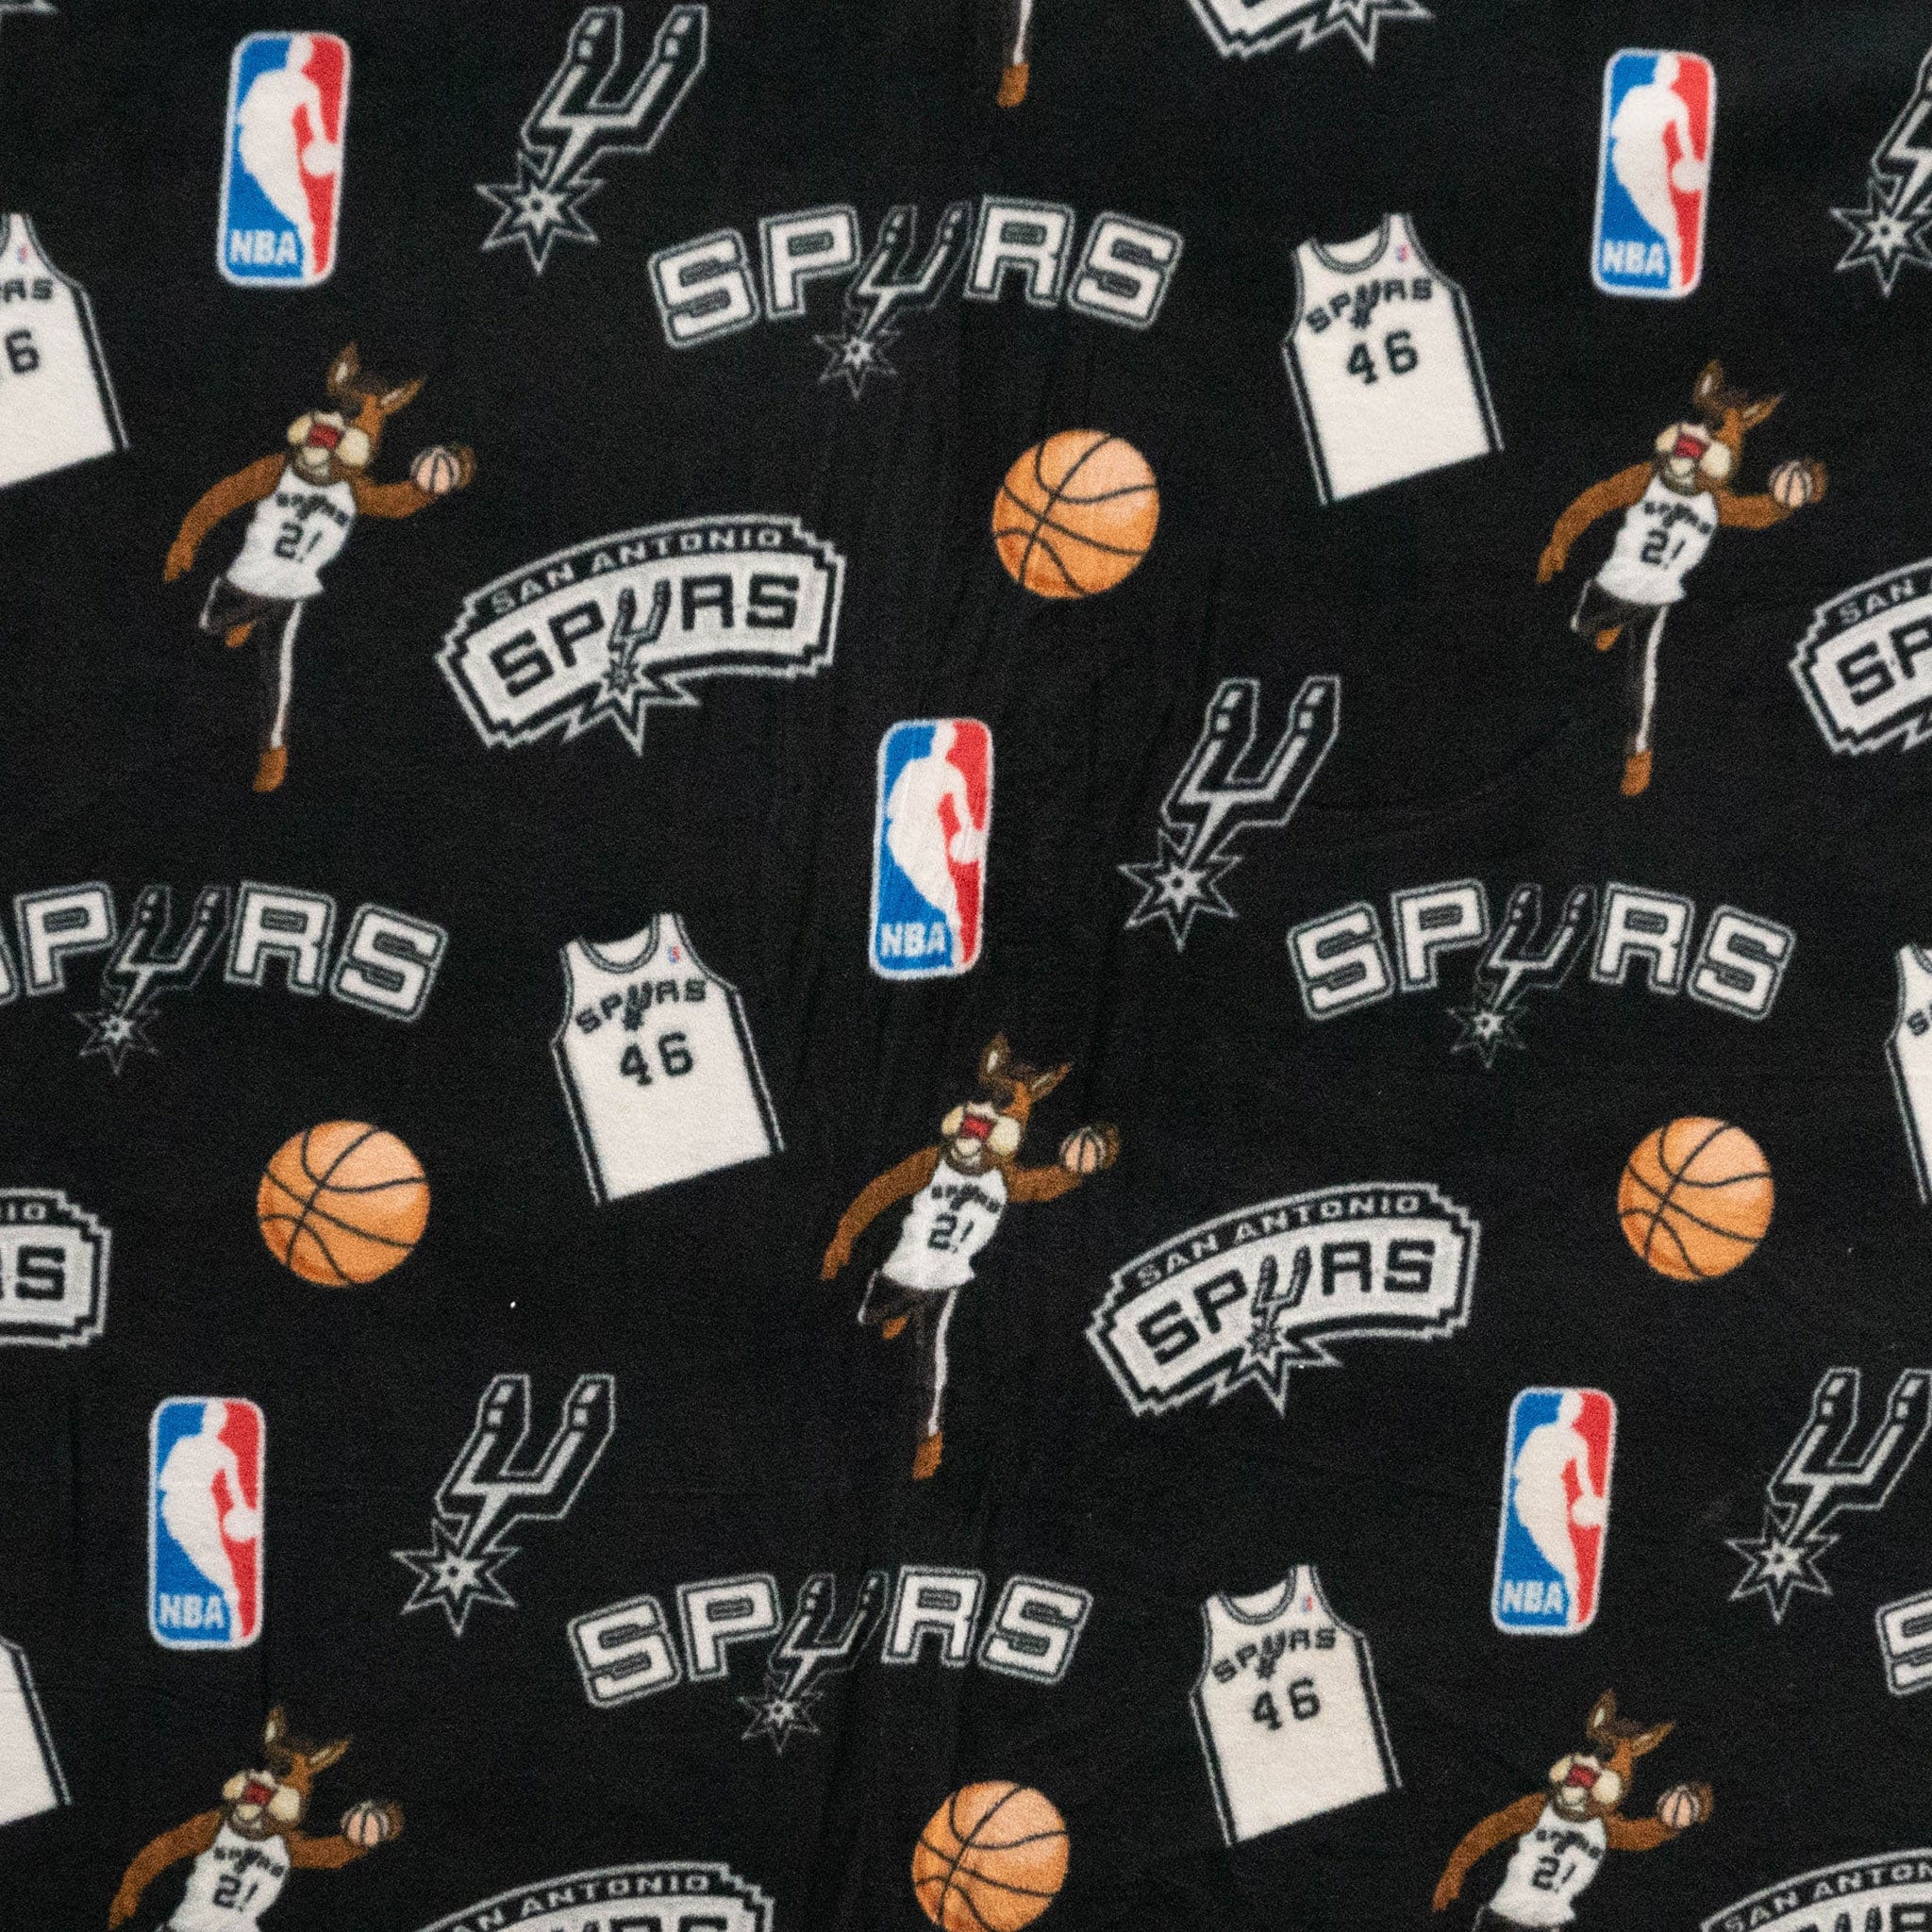 San Antonio Spurs Dog Jersey - Officially Licensed NBA Pet Clothes at